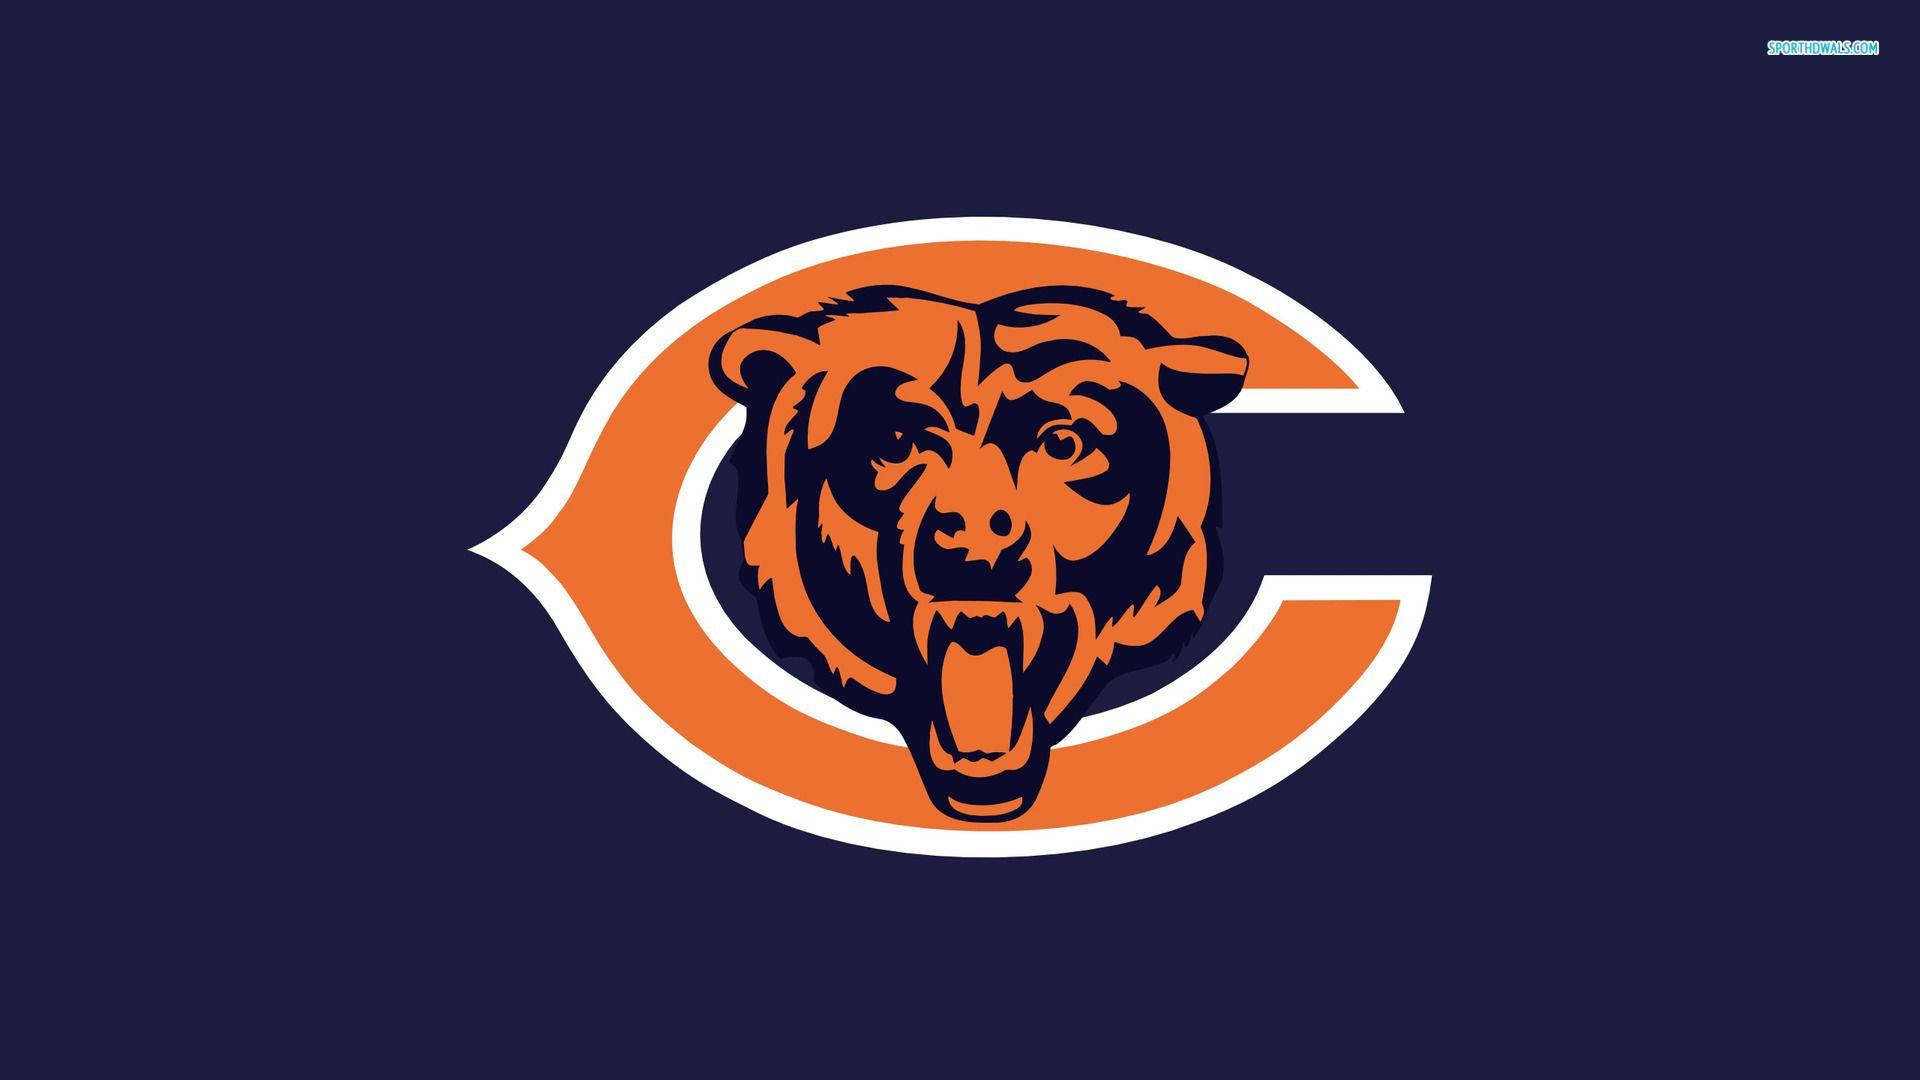 10 Chicago Bears HD Wallpapers and Backgrounds